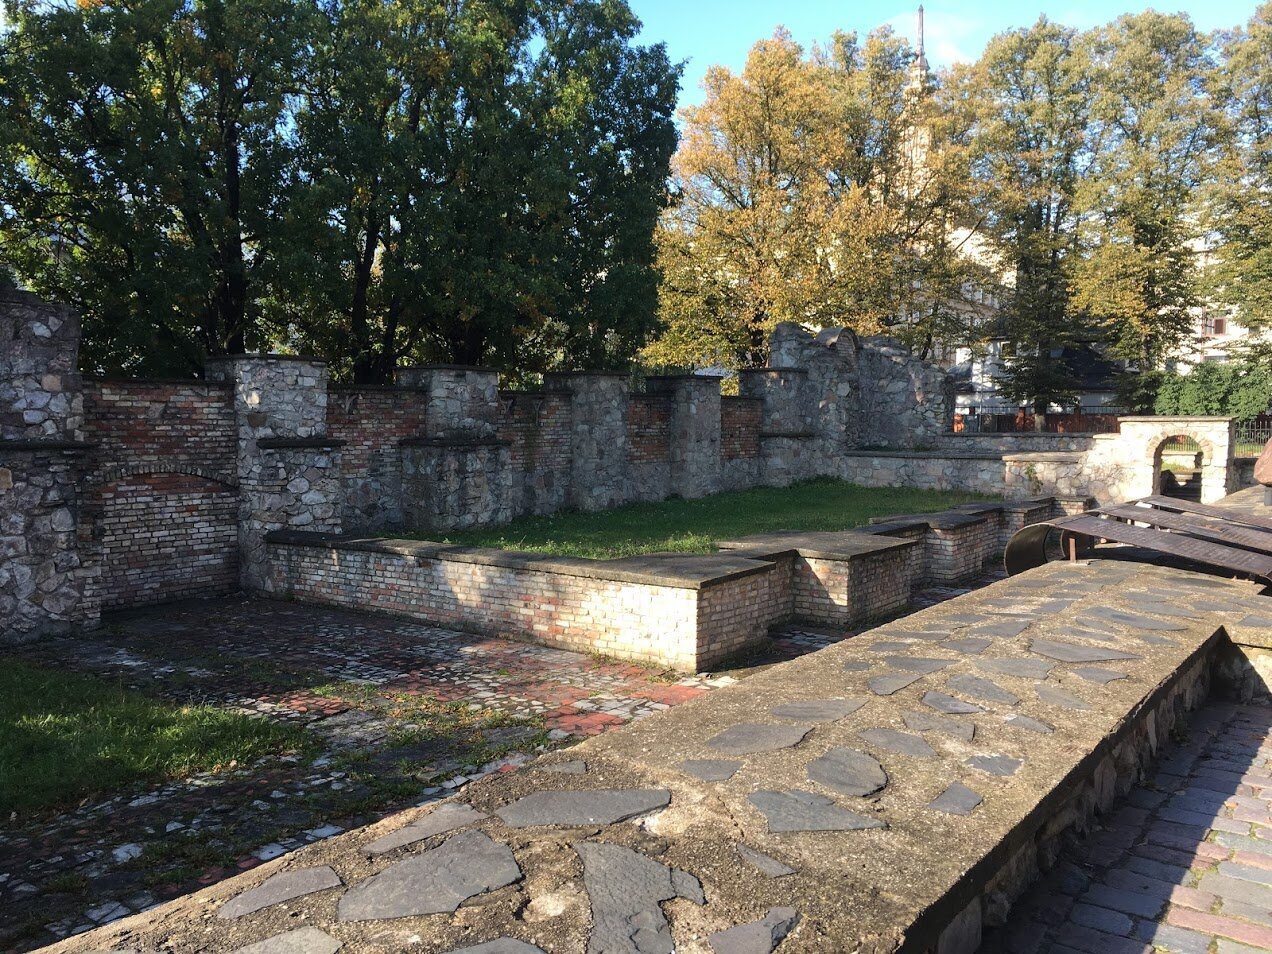 The ruins of the Choral Synagogue